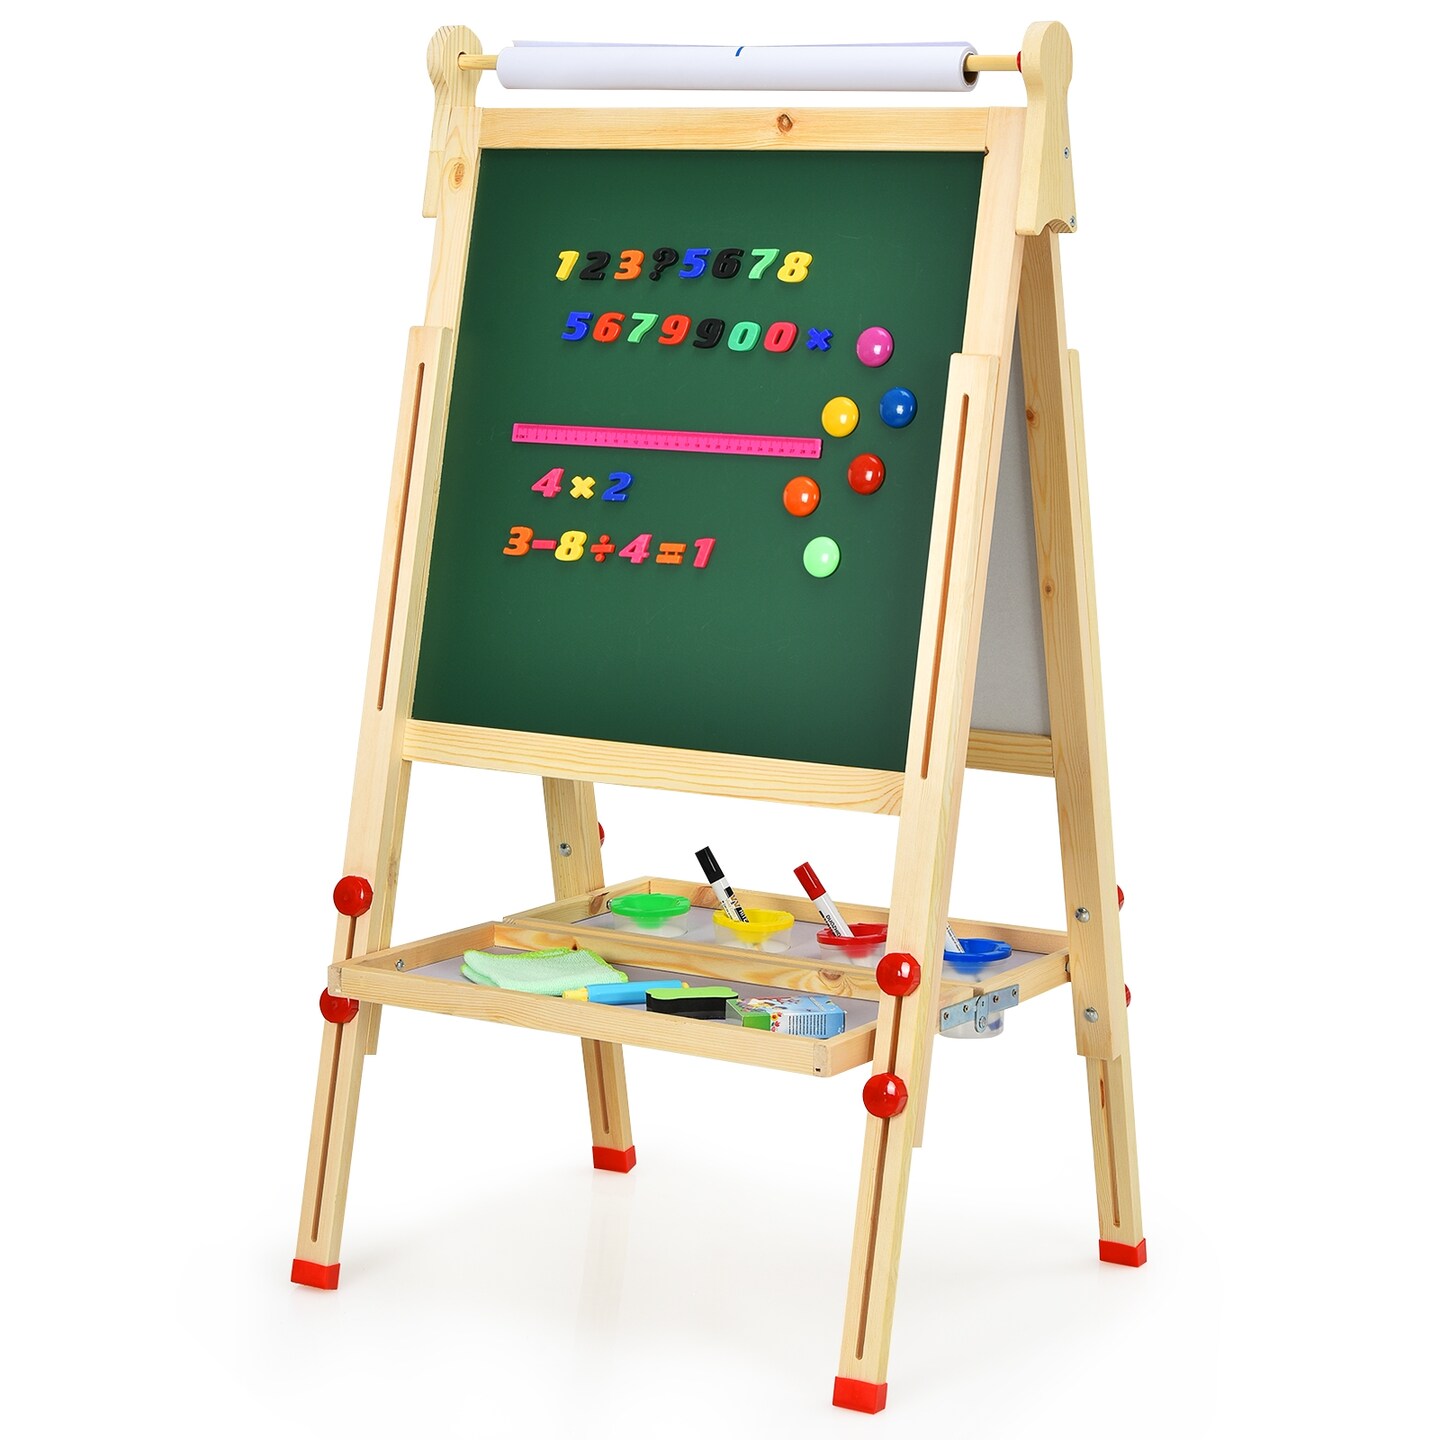 Double-Sided Tabletop Easel - Magnetics Sensory Toy